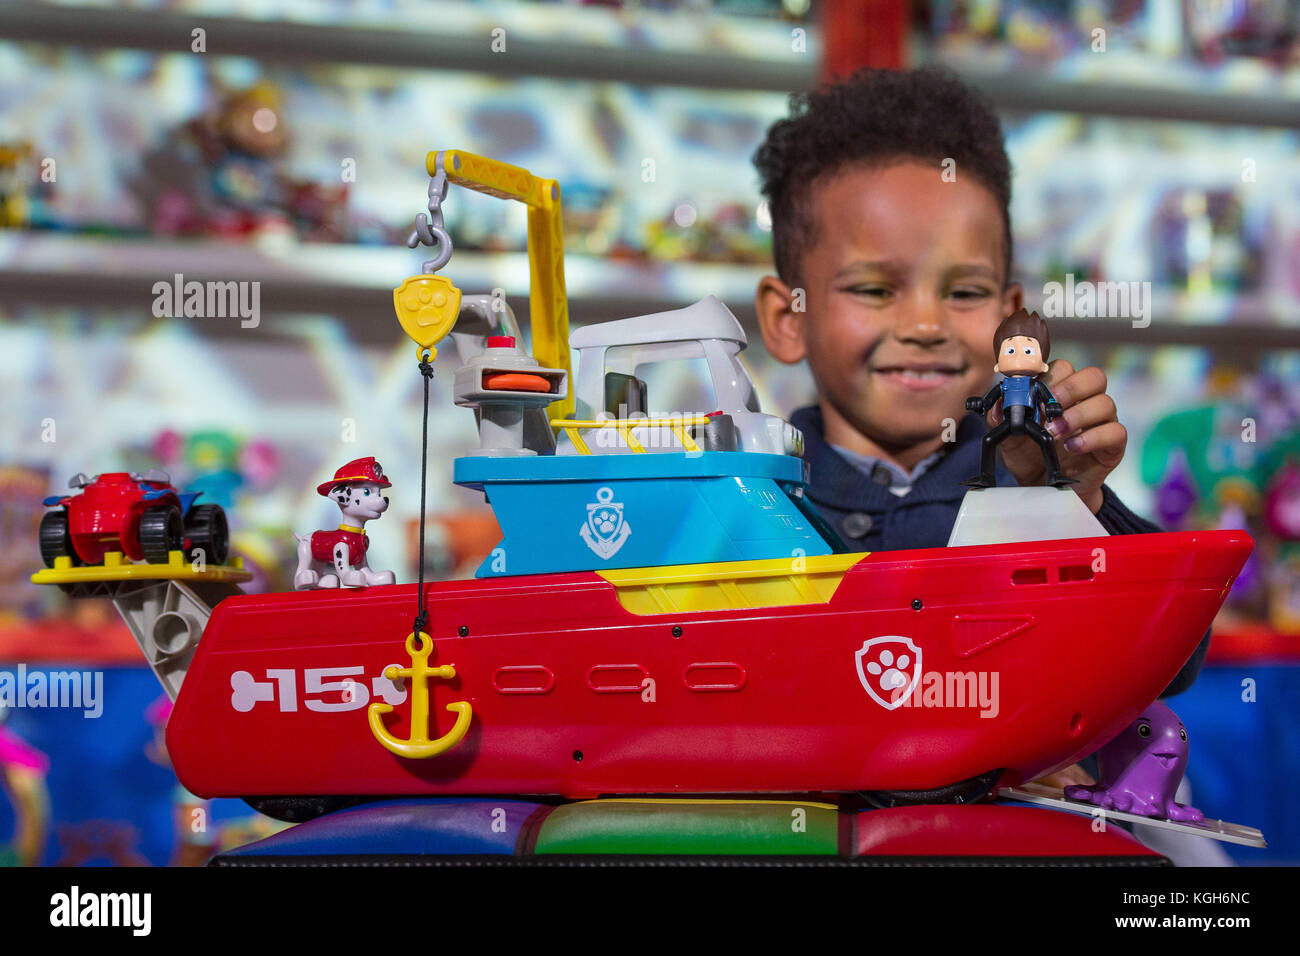 Philip Kamau, 7, plays the Paw Patrol Sea Patroller during the unveiling of the annual DreamToys list compiled by an independent panel of retailers which predicts the top Christmas toys